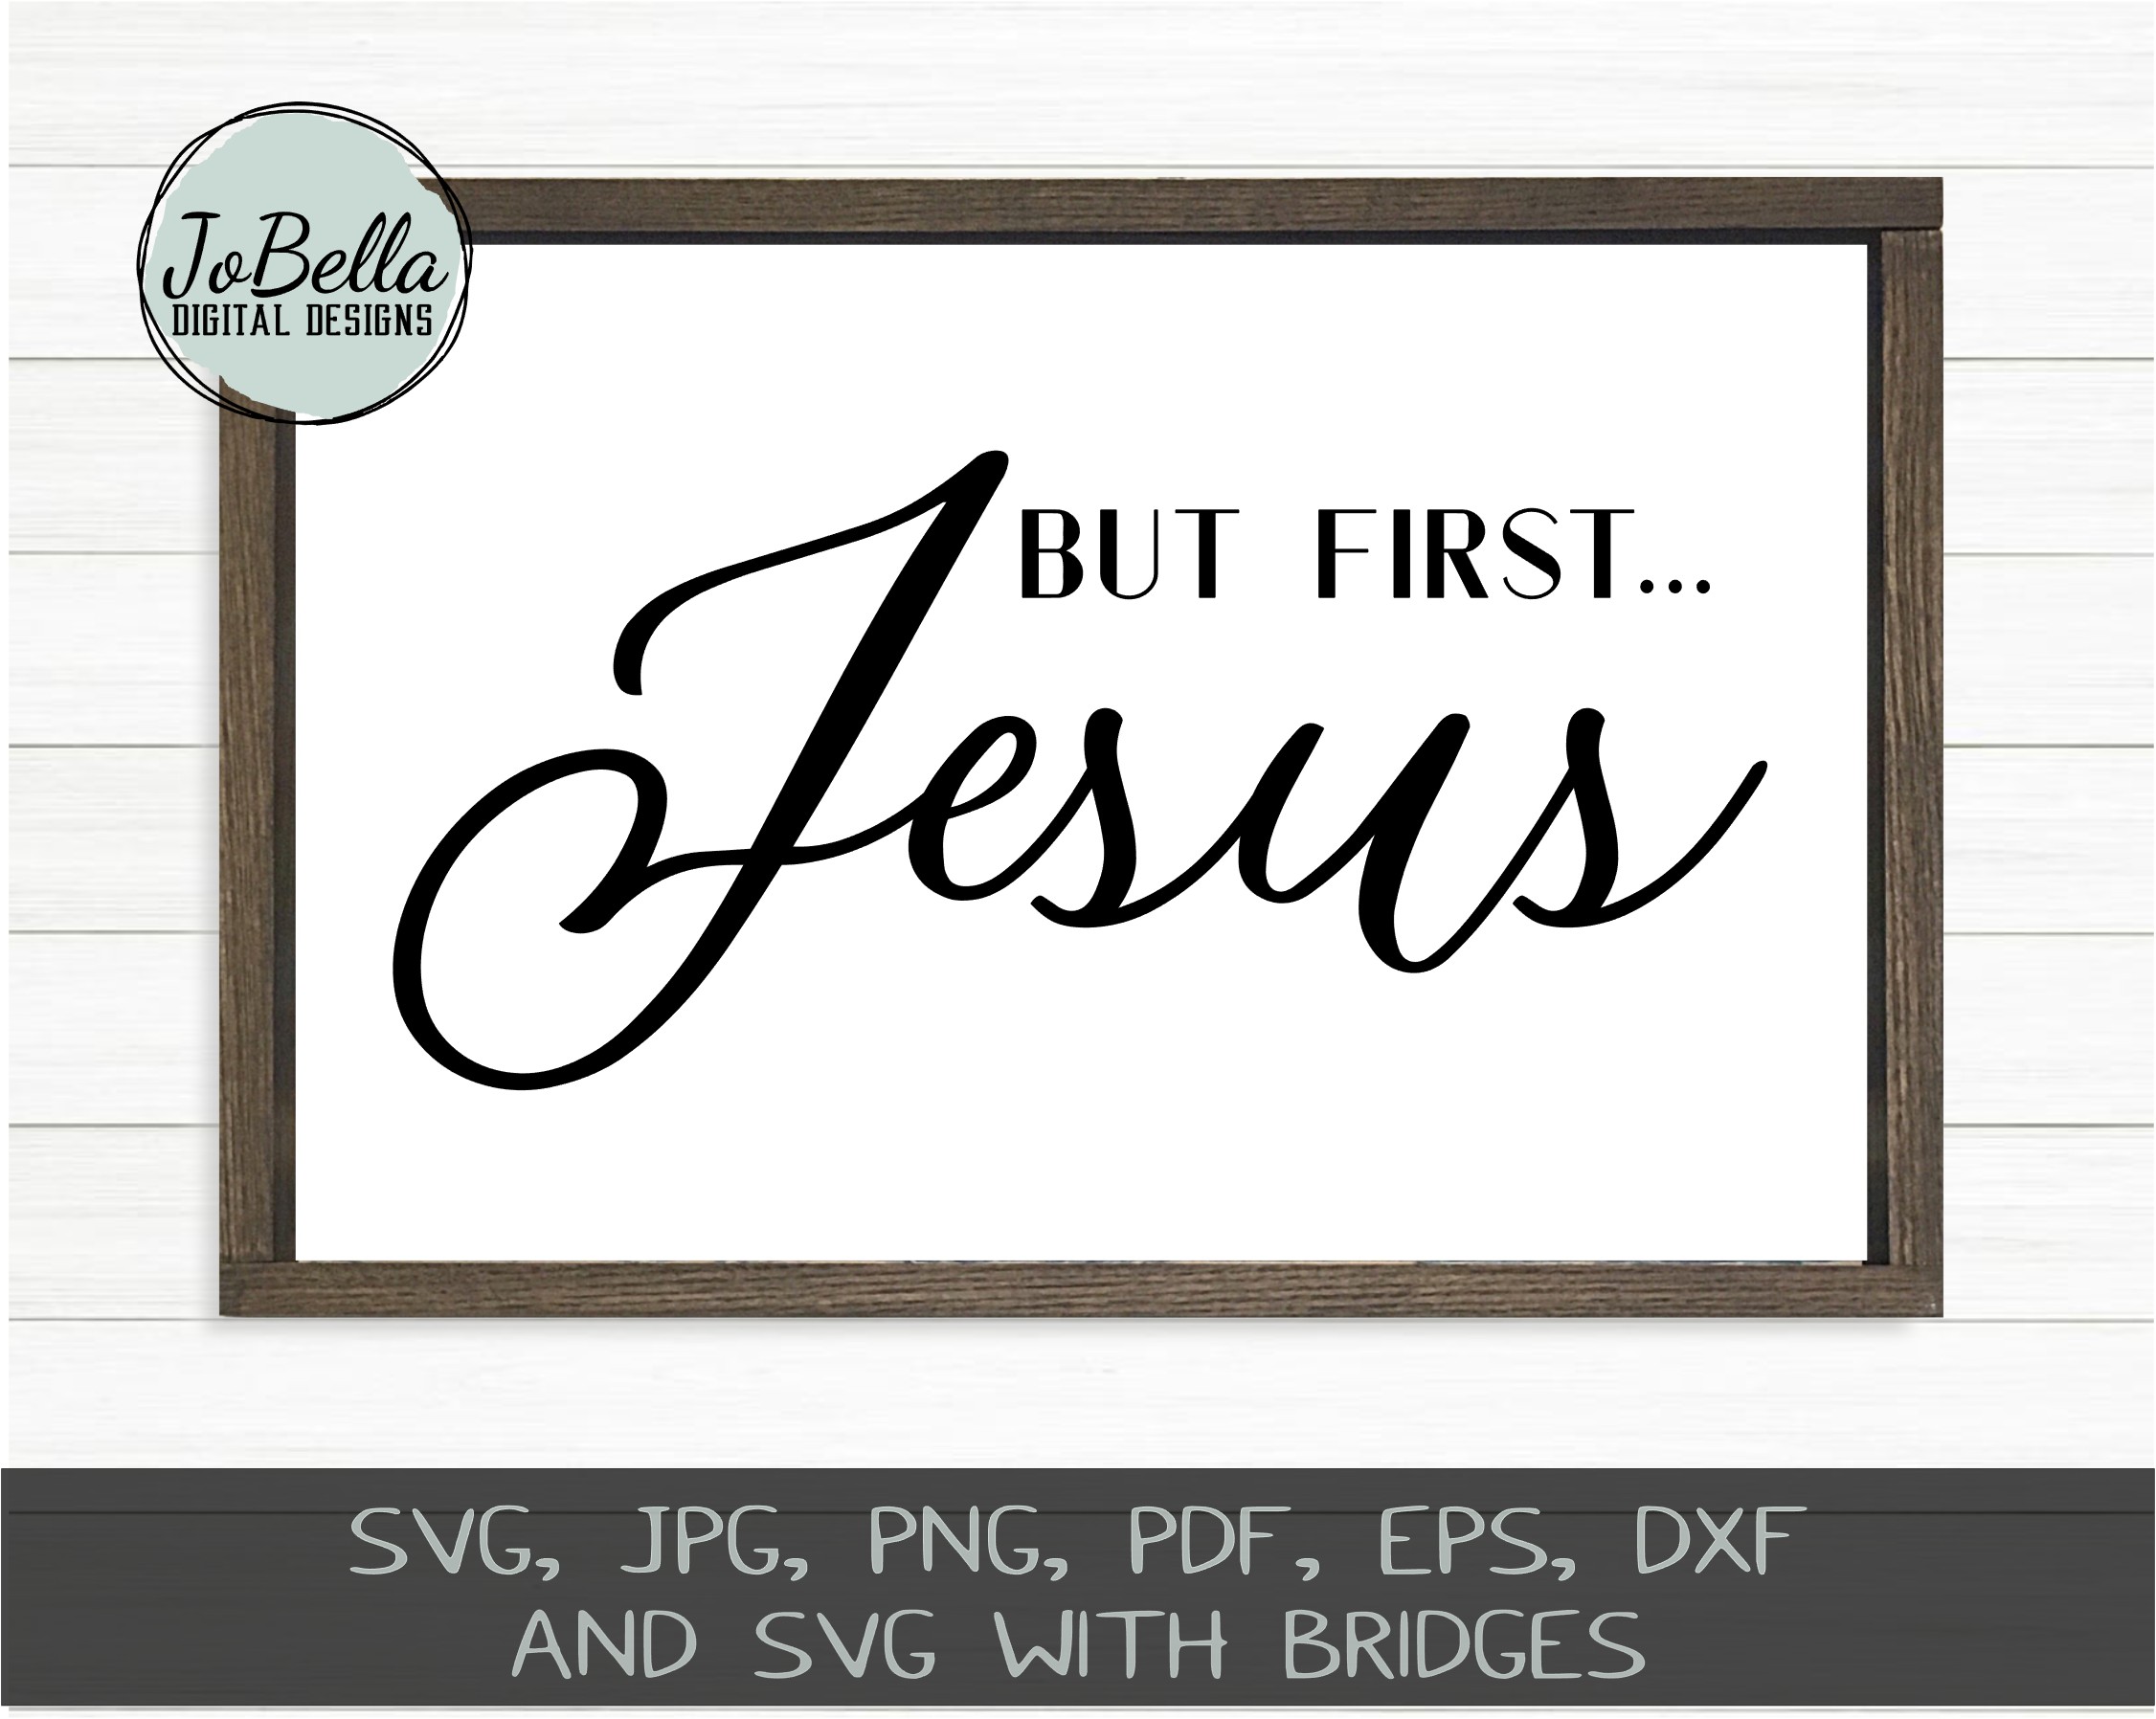 Download The Christian SVG Bundle, Sublimation PNGs, and Printables